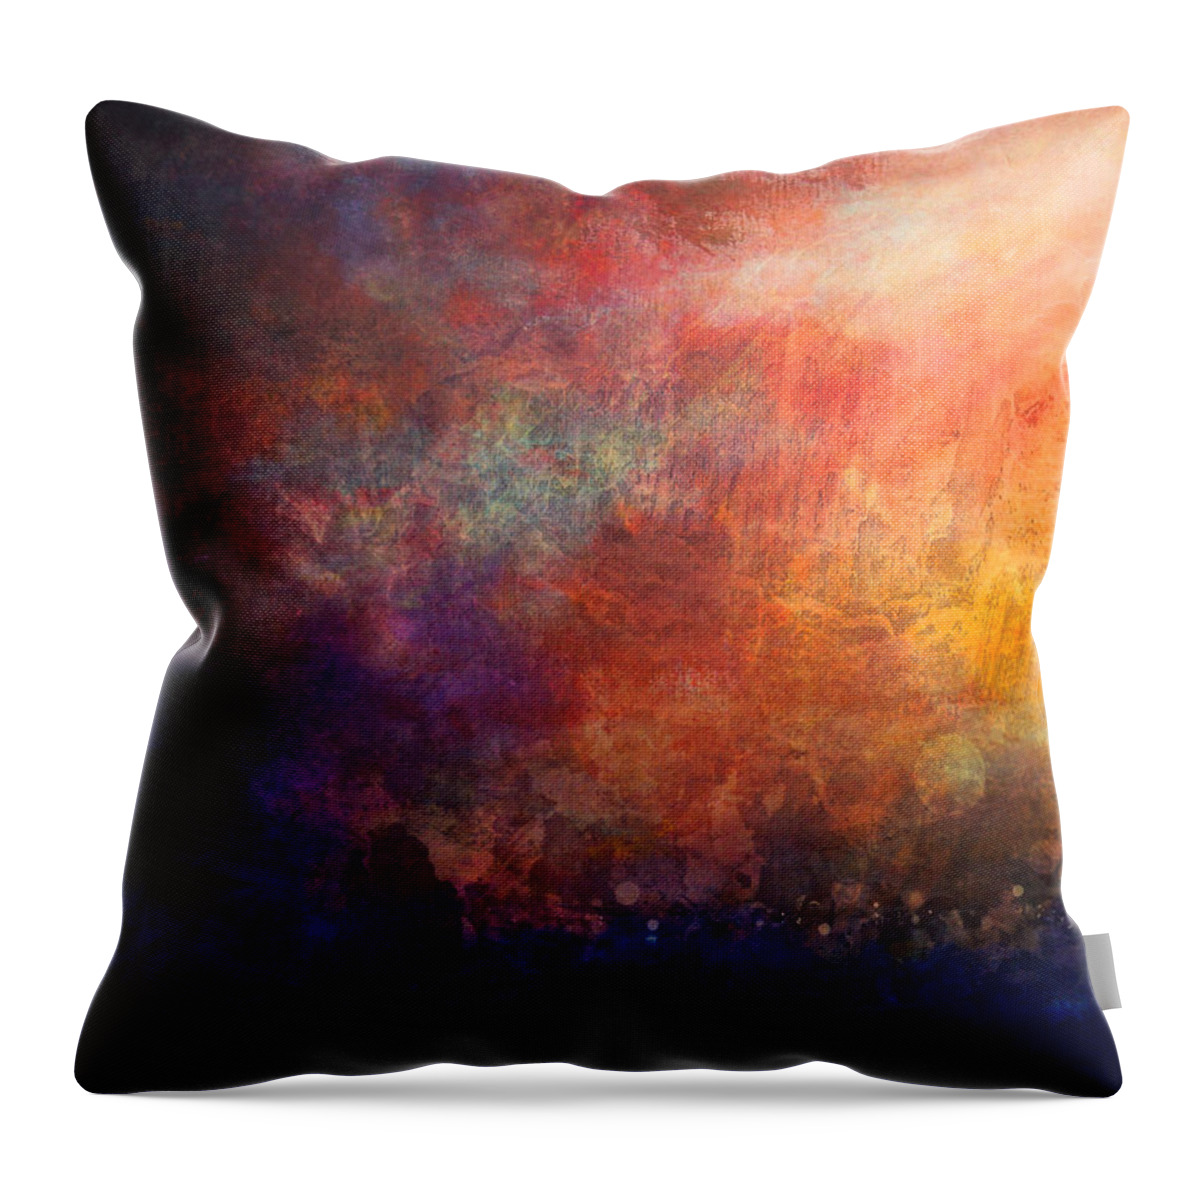 Light Throw Pillow featuring the digital art Heavenly light - Abstract art by Lilia S